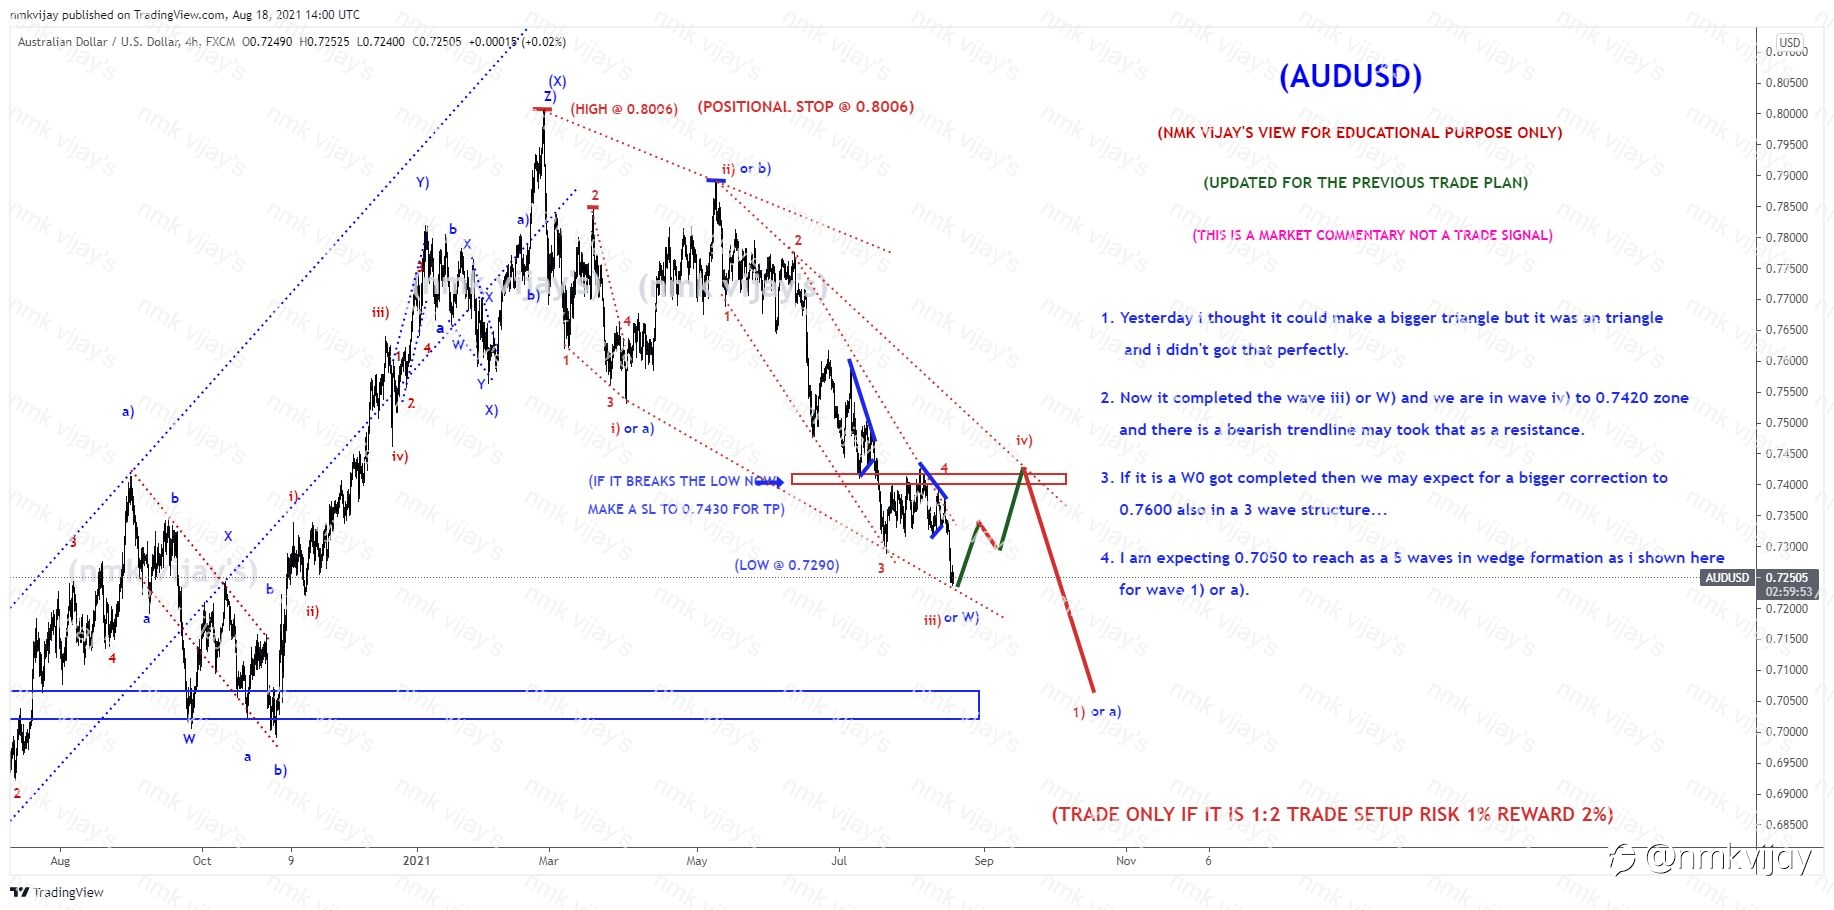 AUDUSD-Thinking yesterday bigger triangle but that is small too